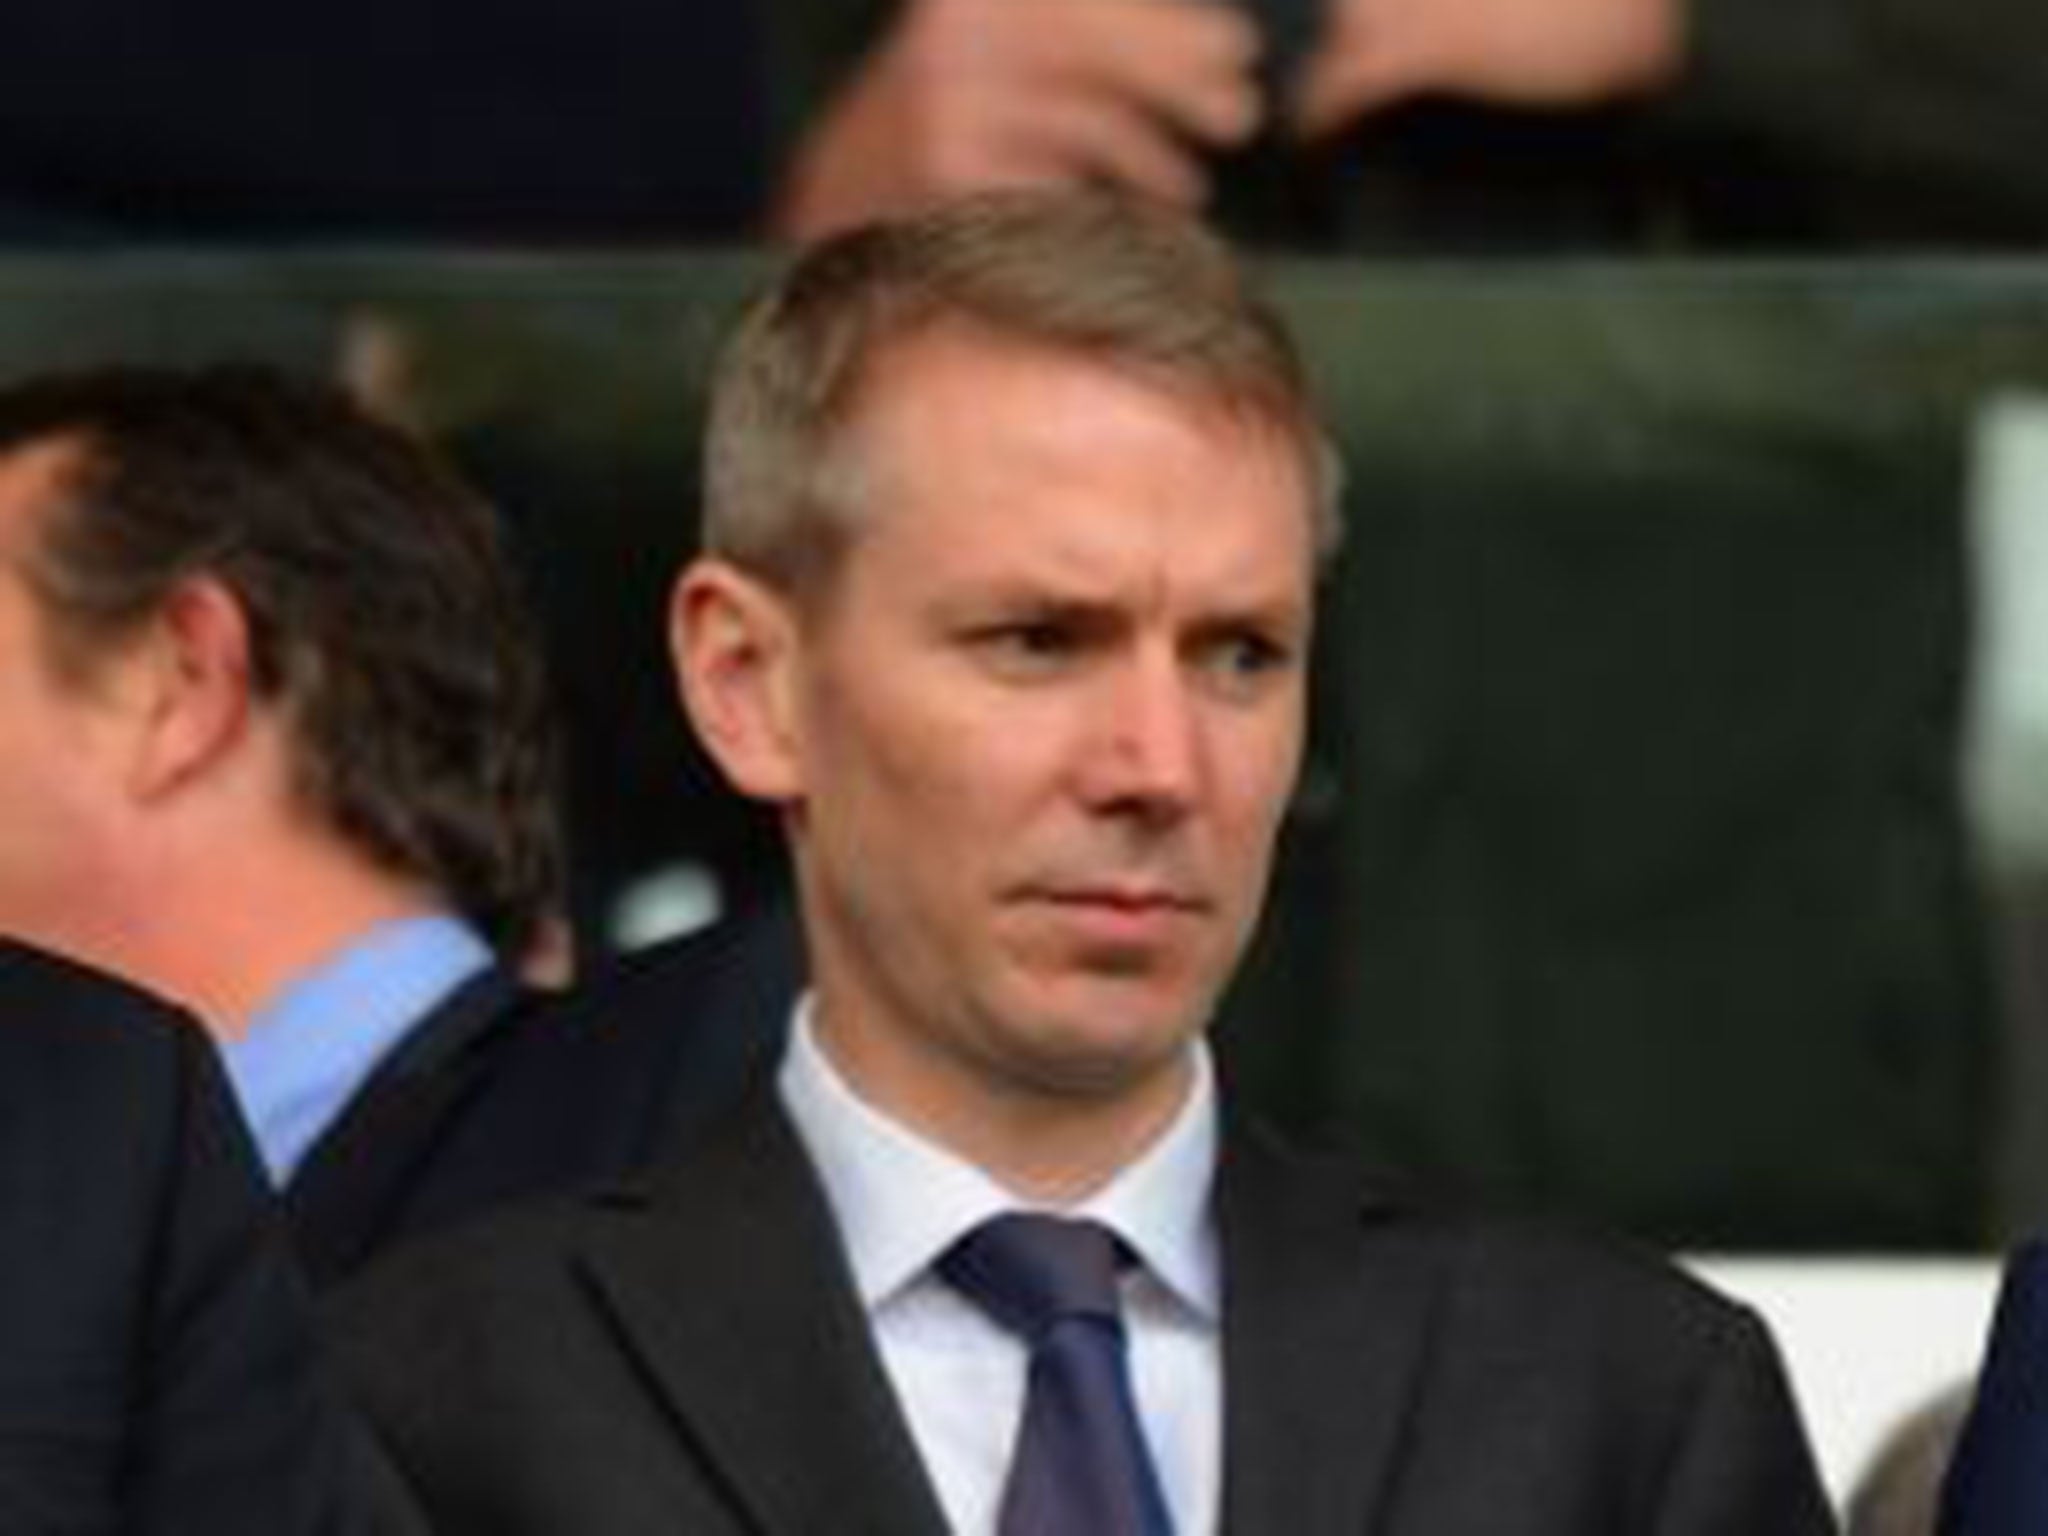 Iain Moody resigns as sporting director of Crystal Palace with immediate affect following allegations about racist, sexist and homophobic texts shared with his former colleague Malky Mackay